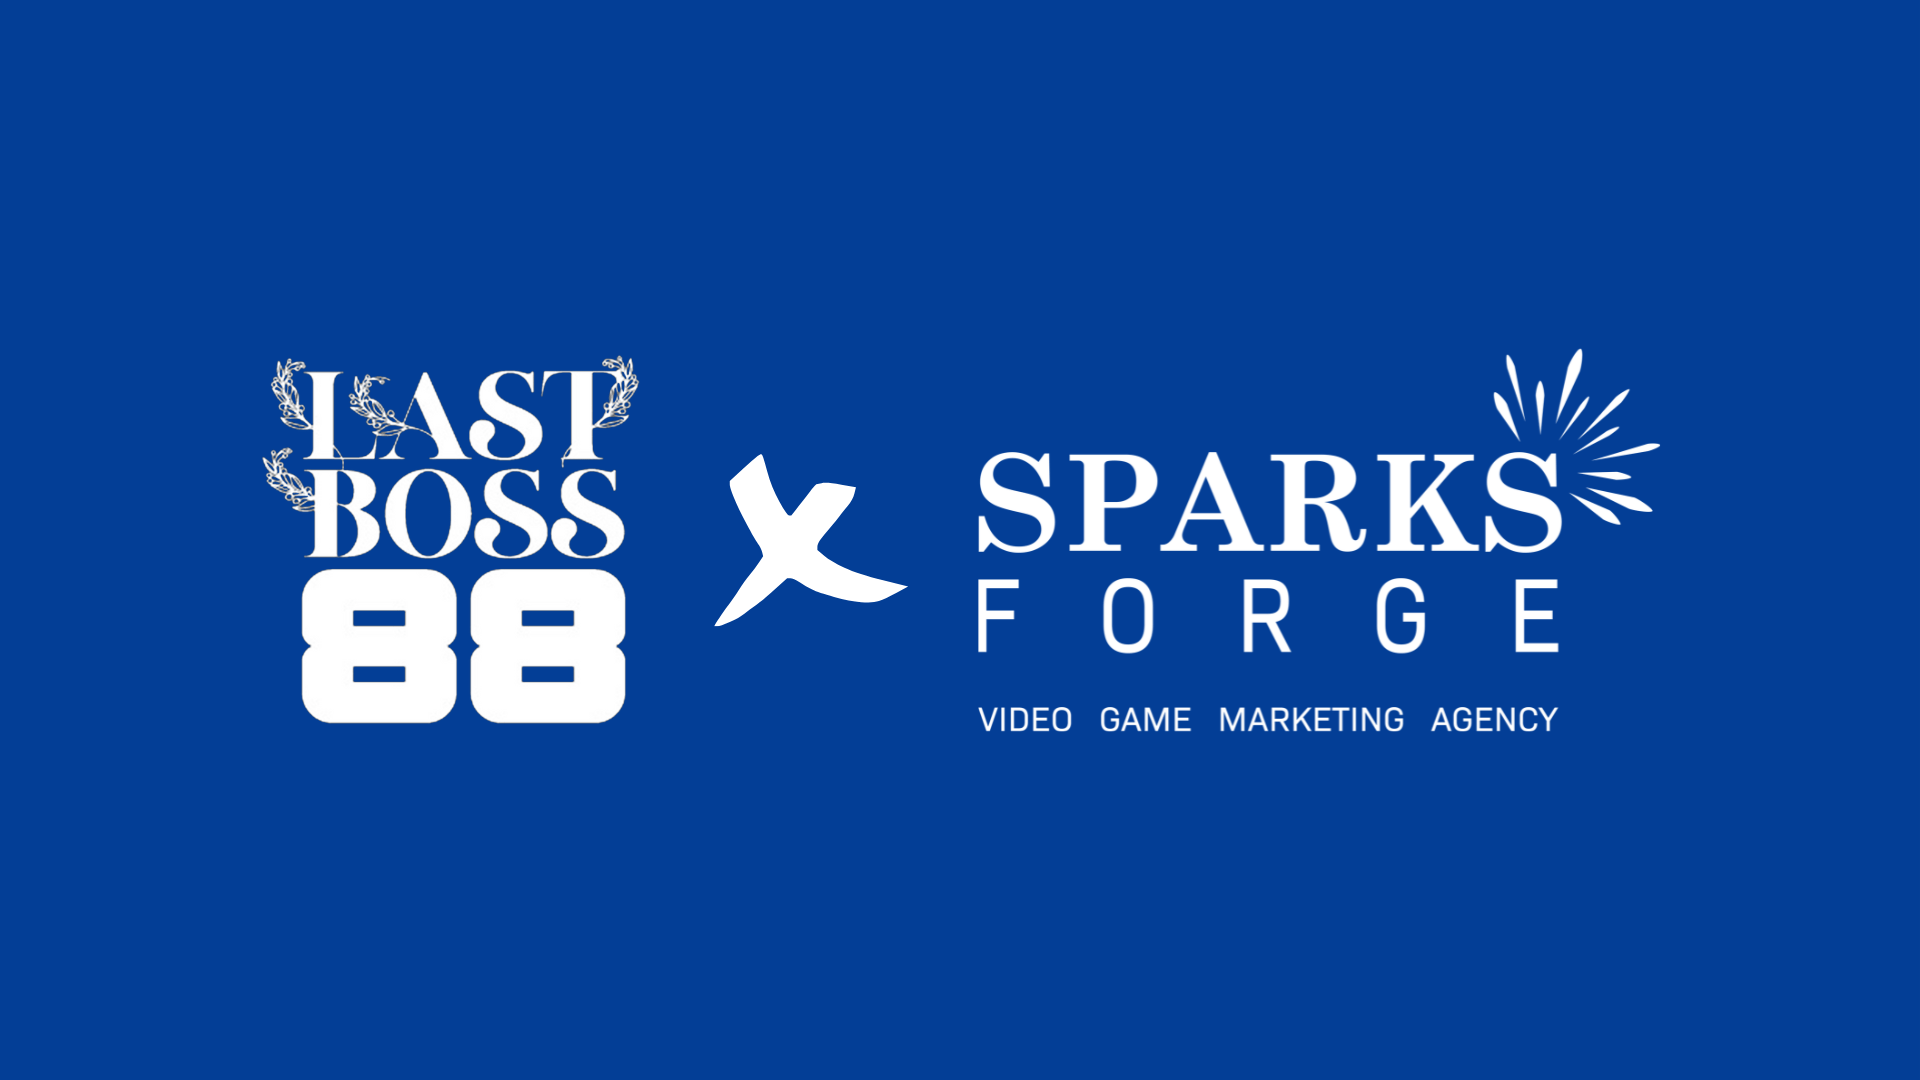 Game Dev - LAST BOSS 88 x SPARKS FORGE COLLAB